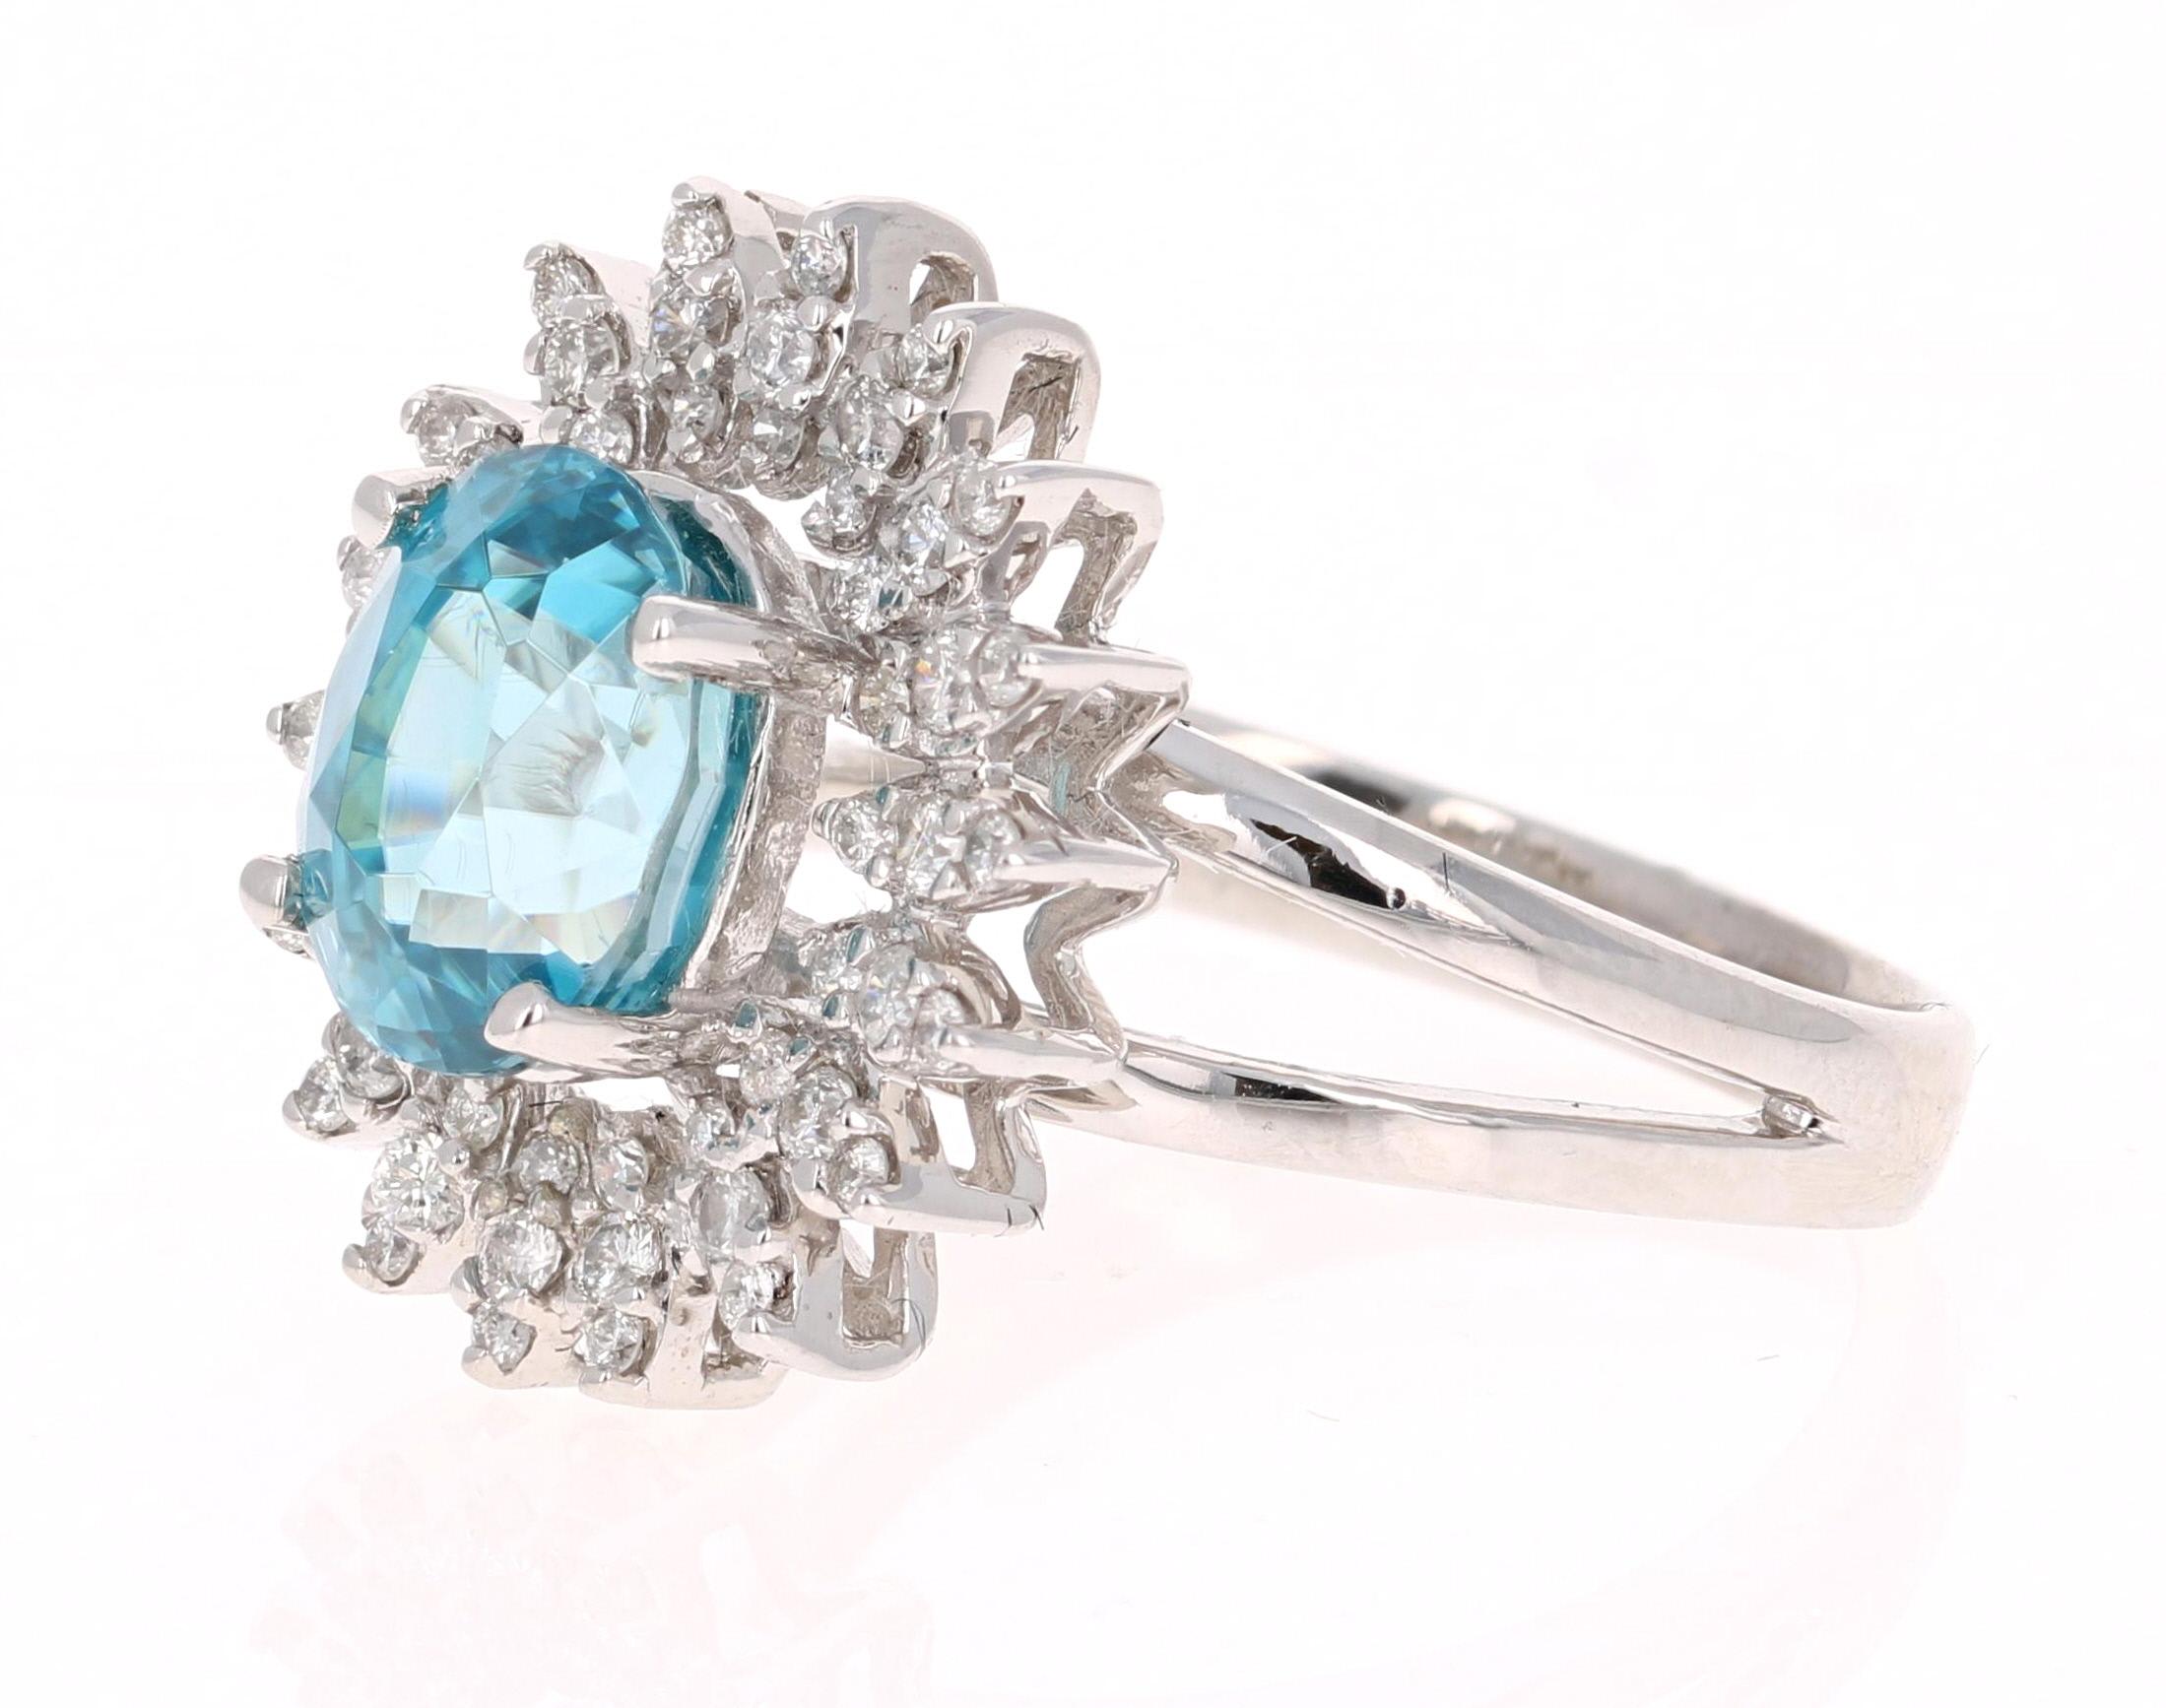 Contemporary 4.74 Carat Blue Zircon Diamond White Gold Cocktail Ring For Sale